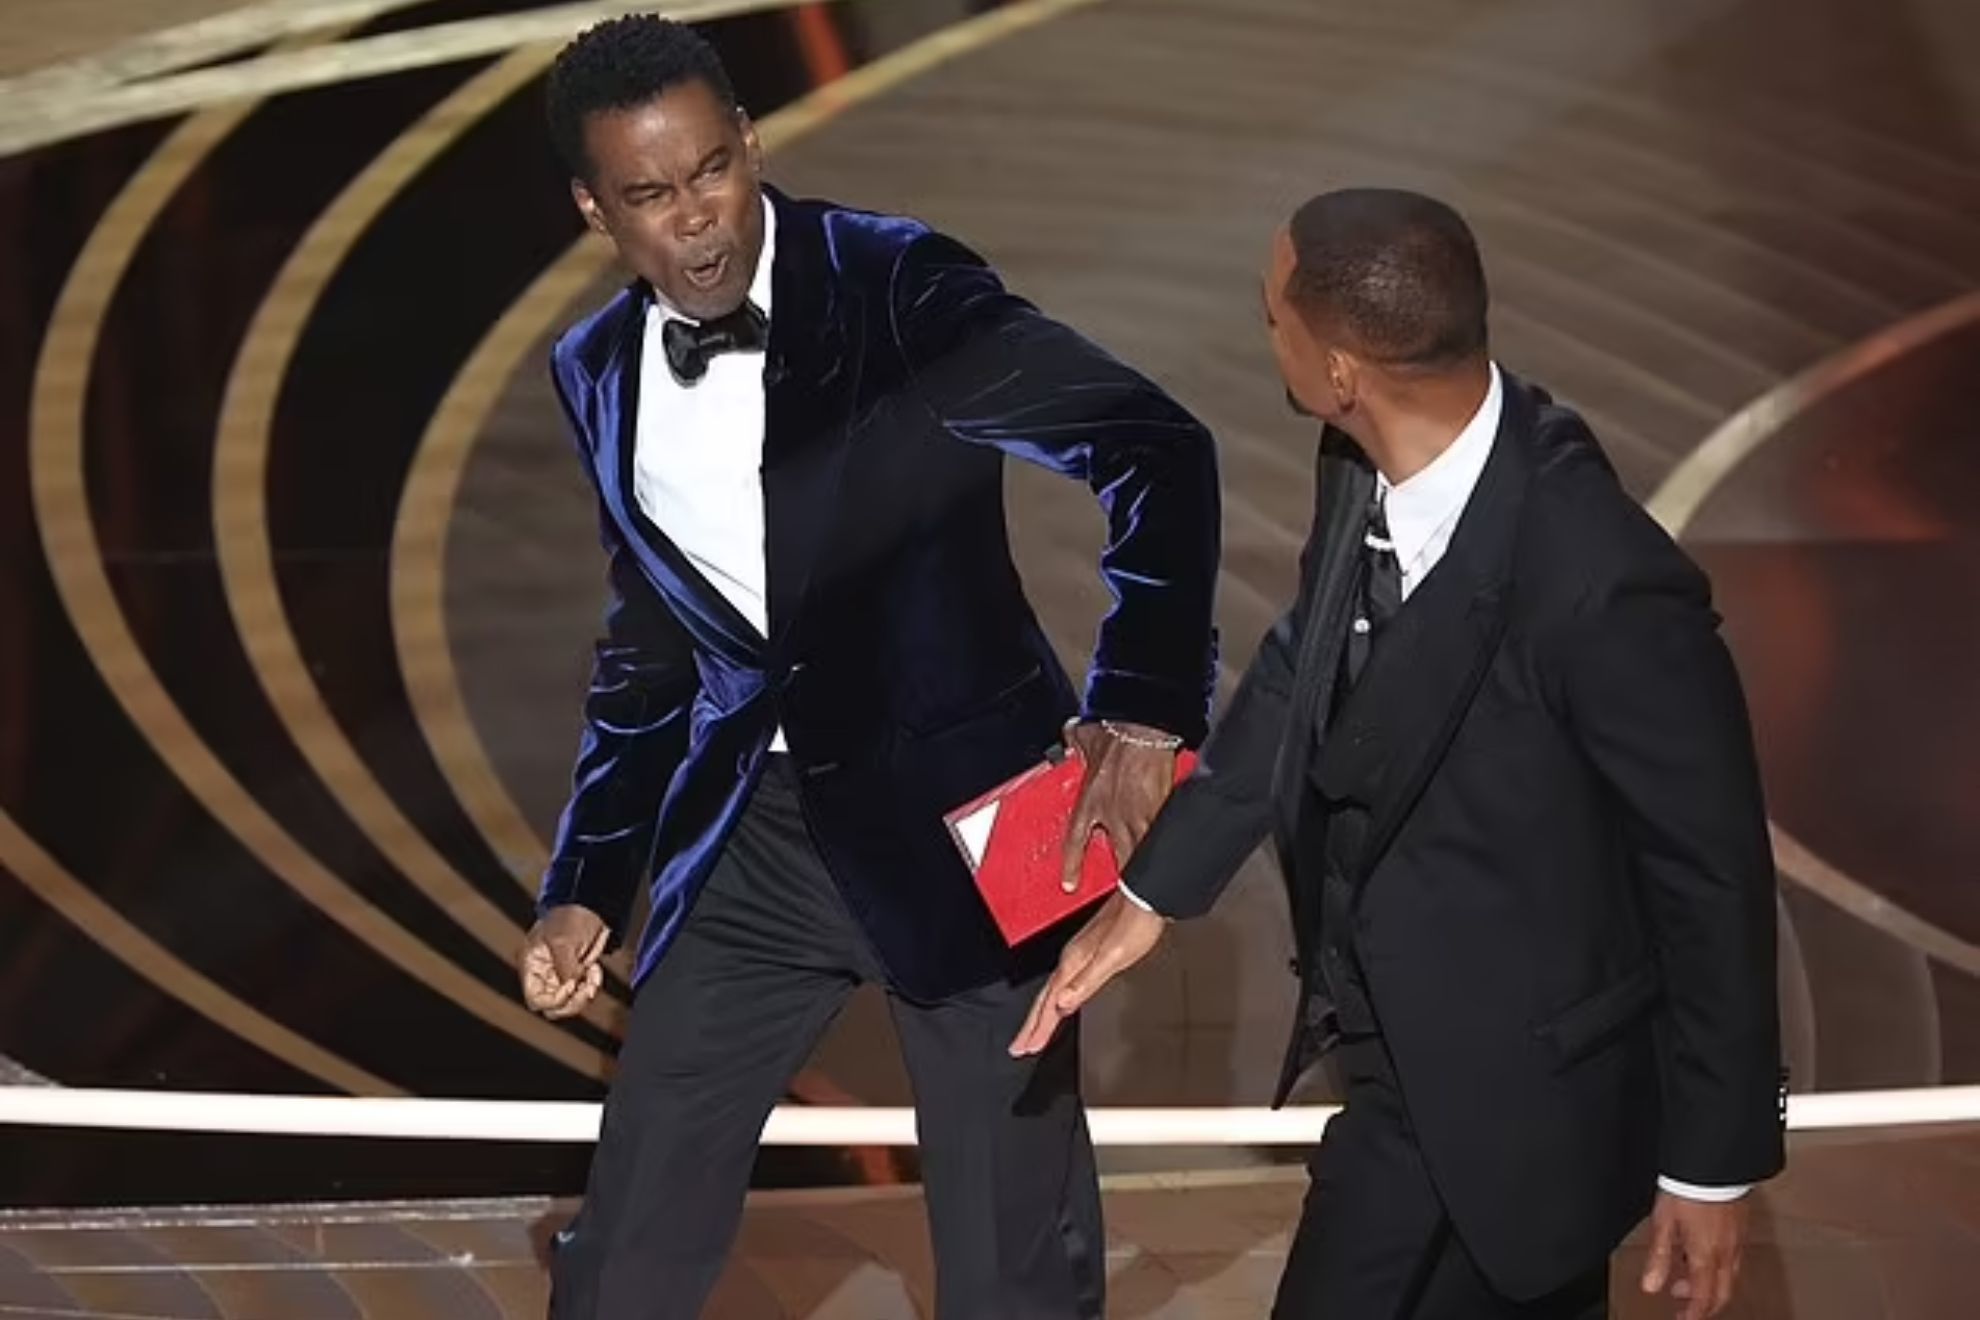 Chris Rock after slap from Will Smith at the 2022 Oscars